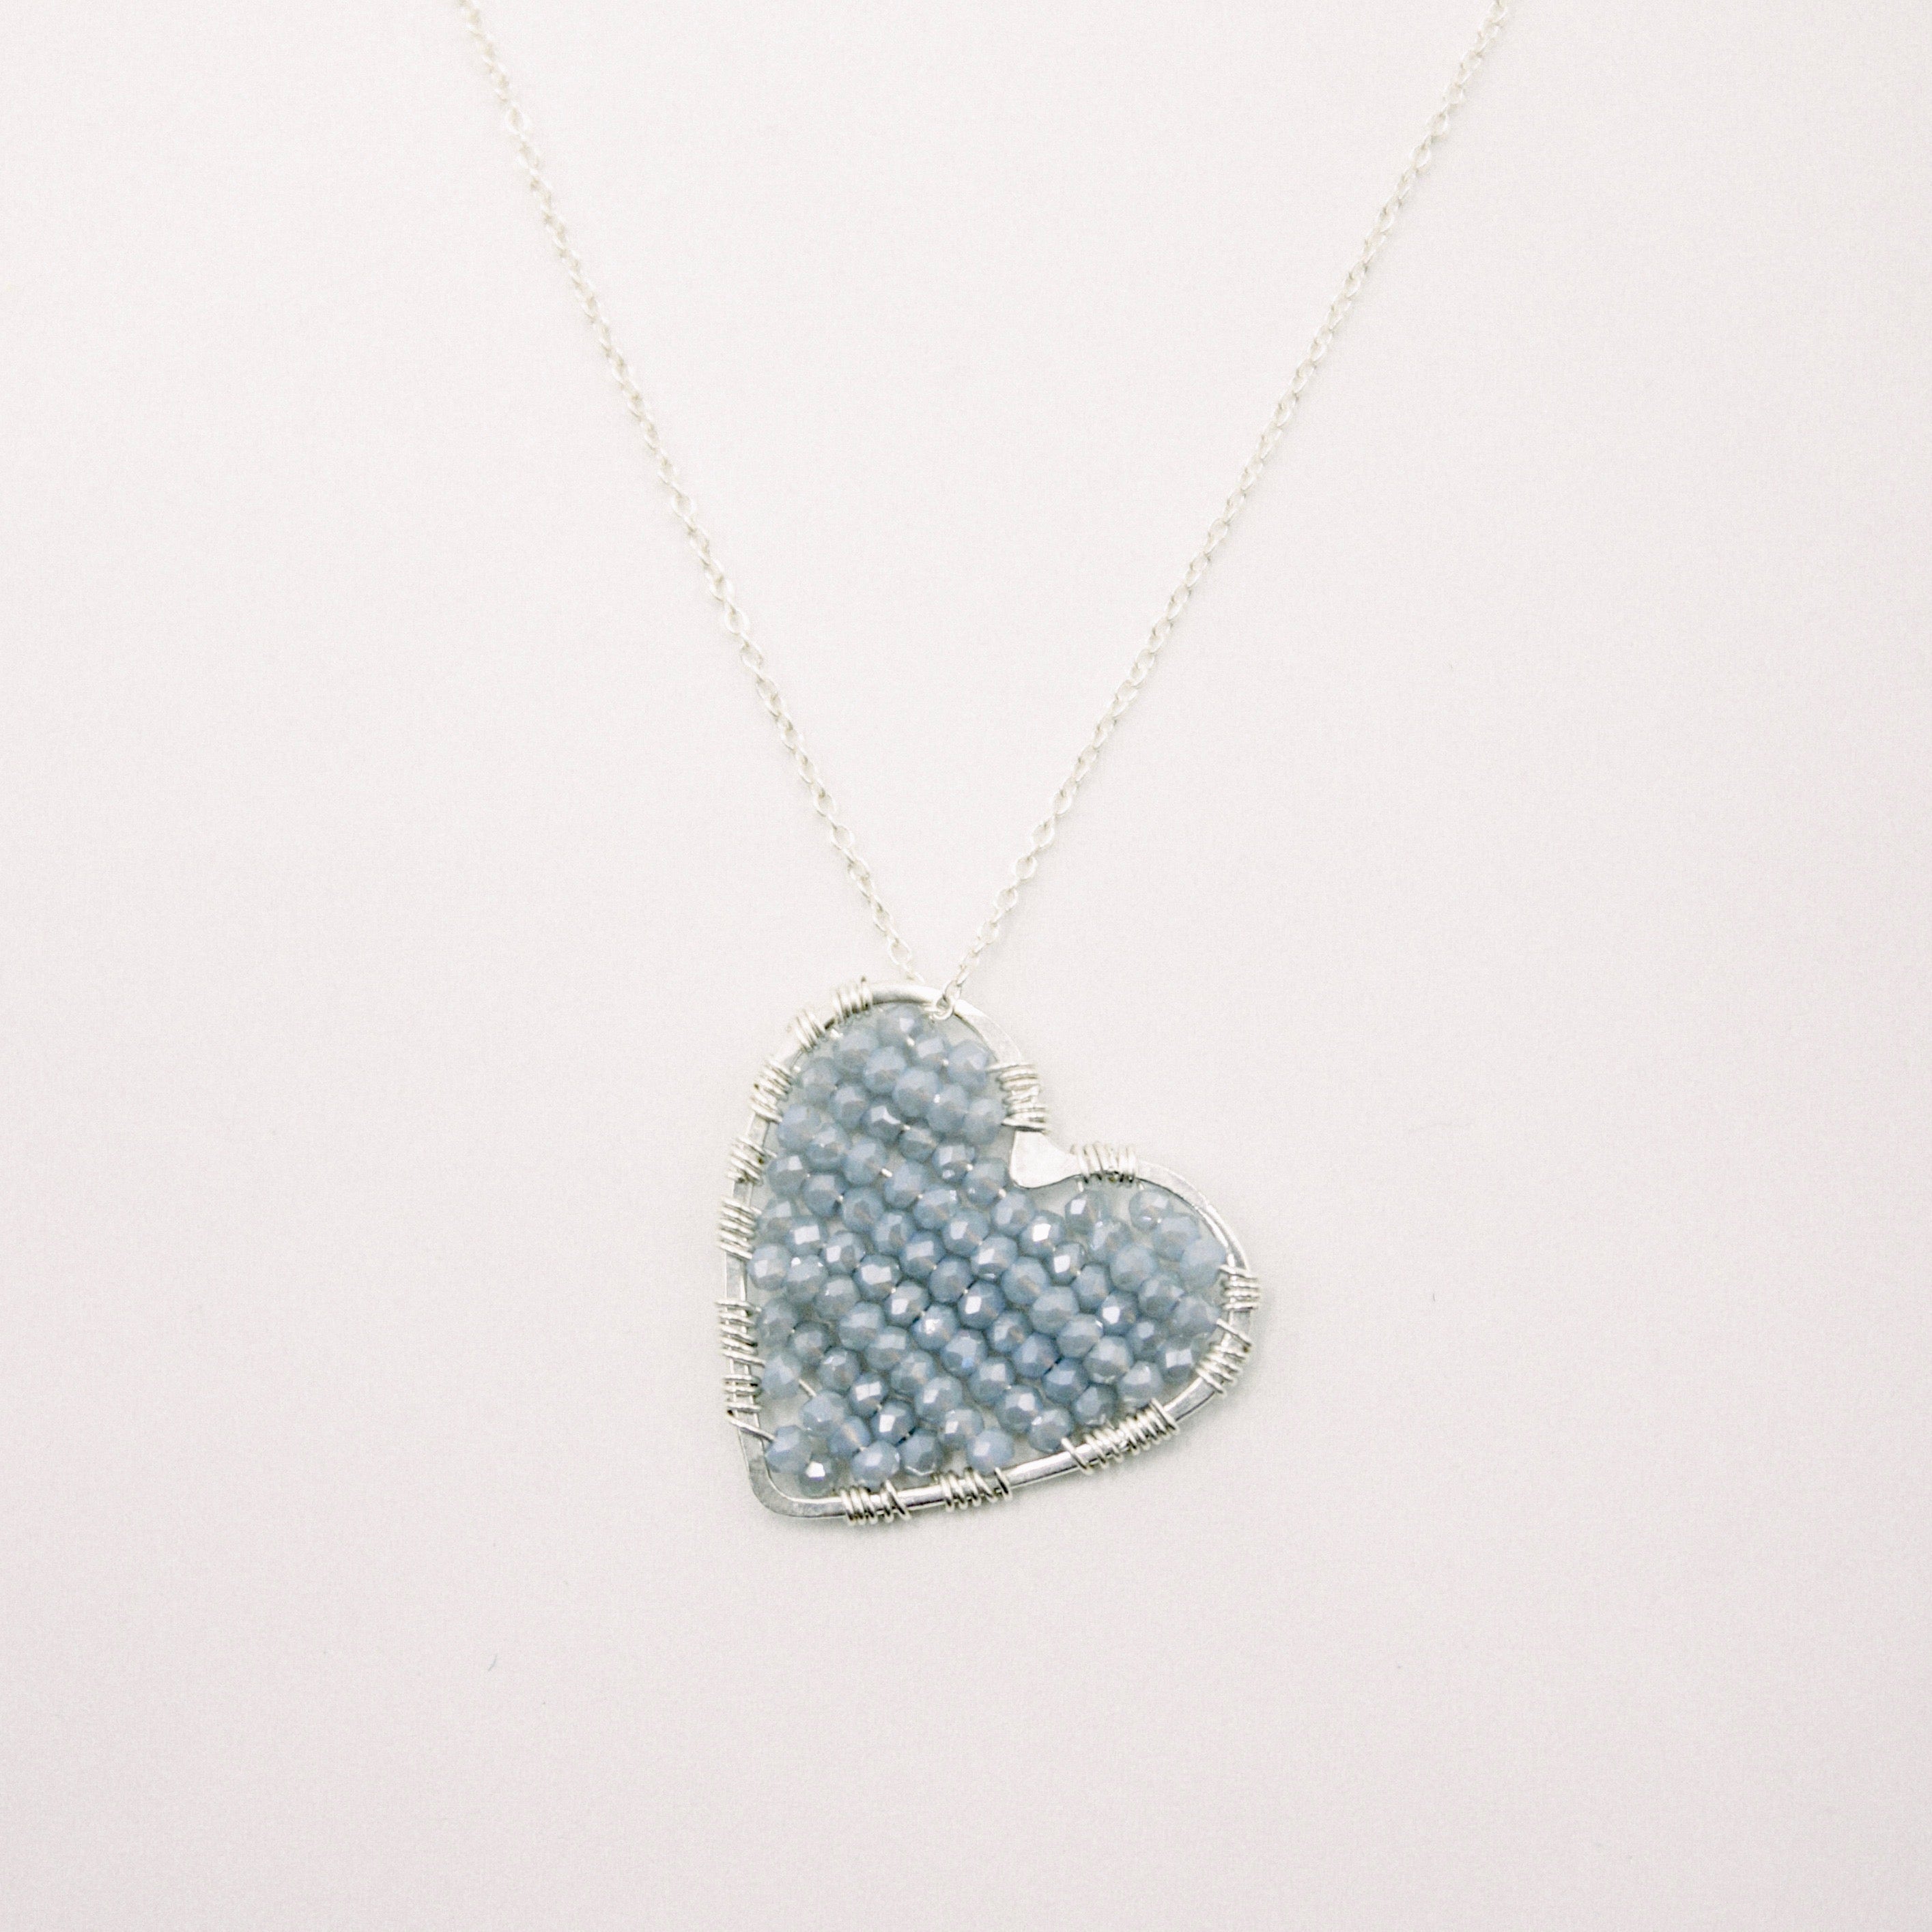 Sky & Silver Love Drop Necklace, featured image